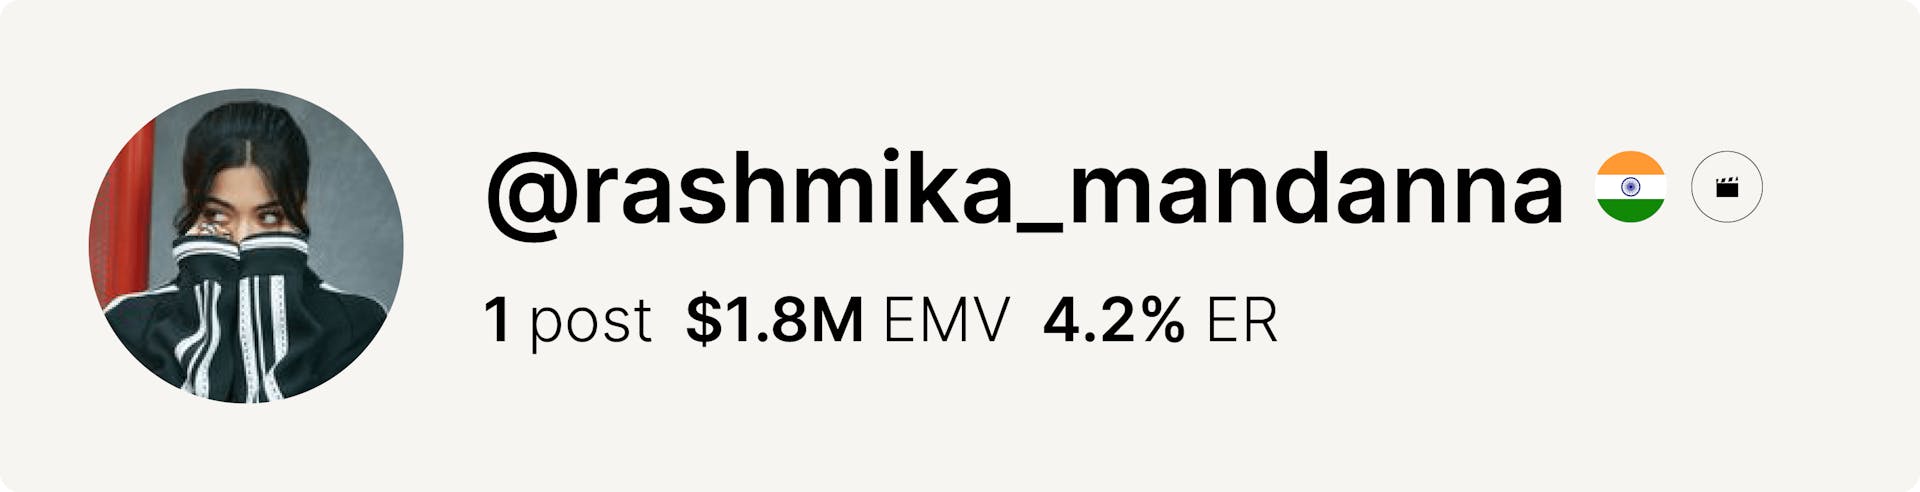 An image of Rashmika Mandanna's Instagram account and data from the fashion week.